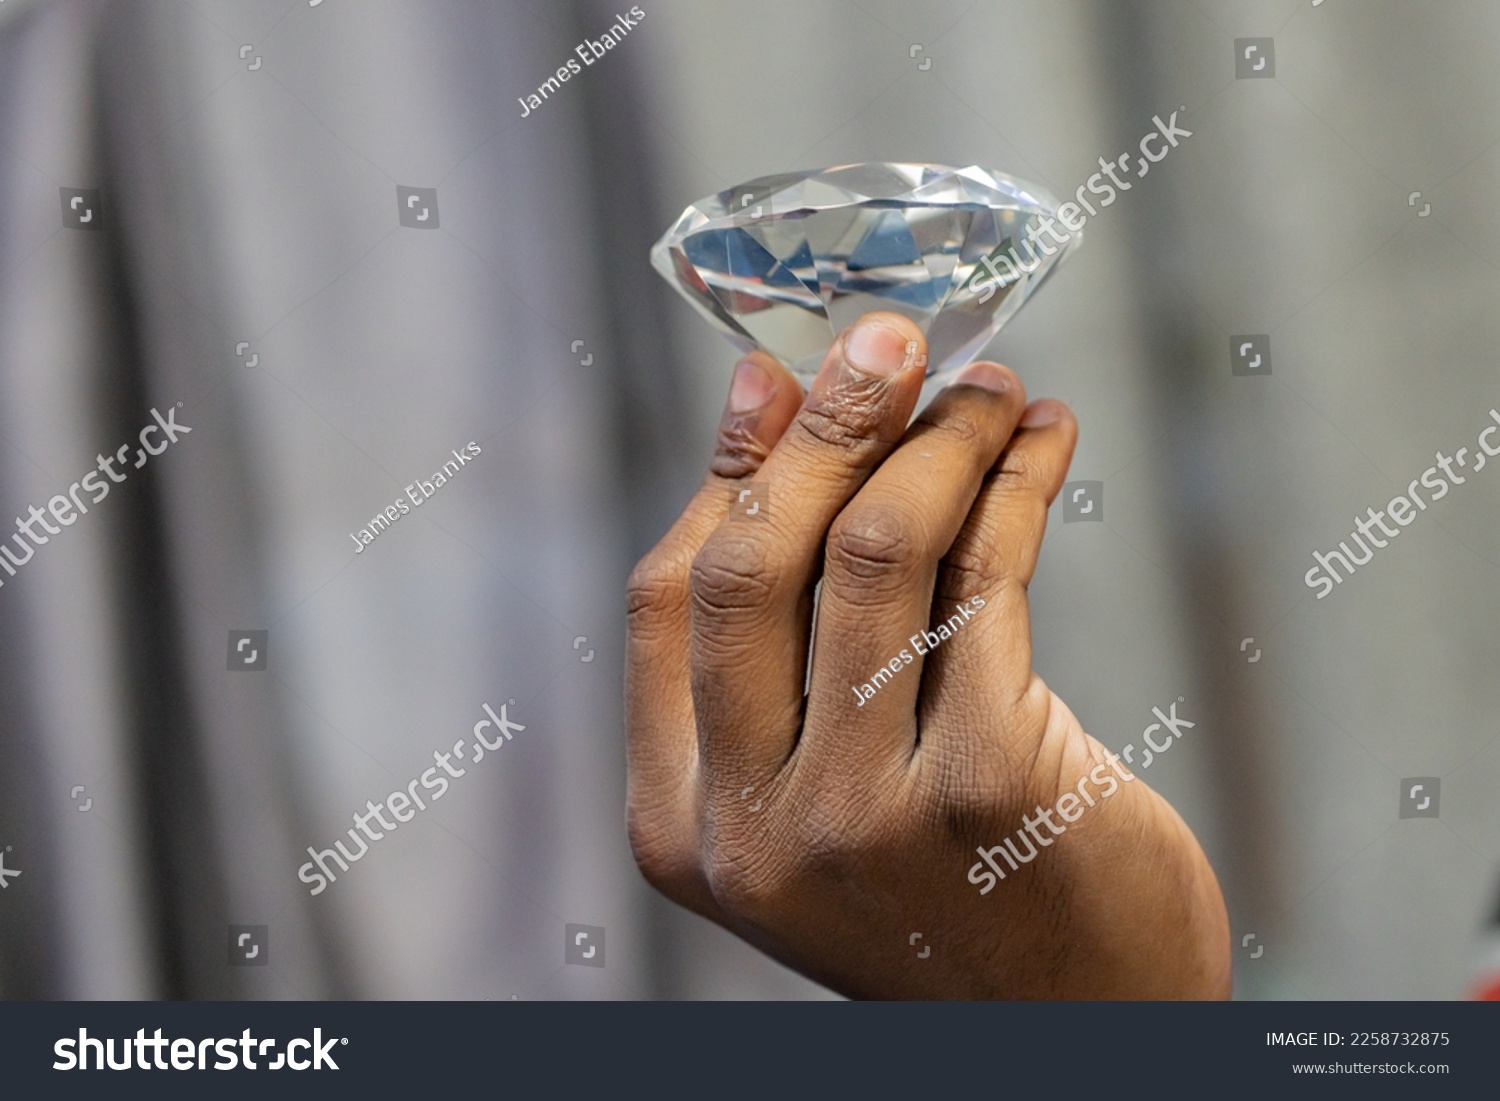 Focus on foreground of fingers holding a diamond. #2258732875